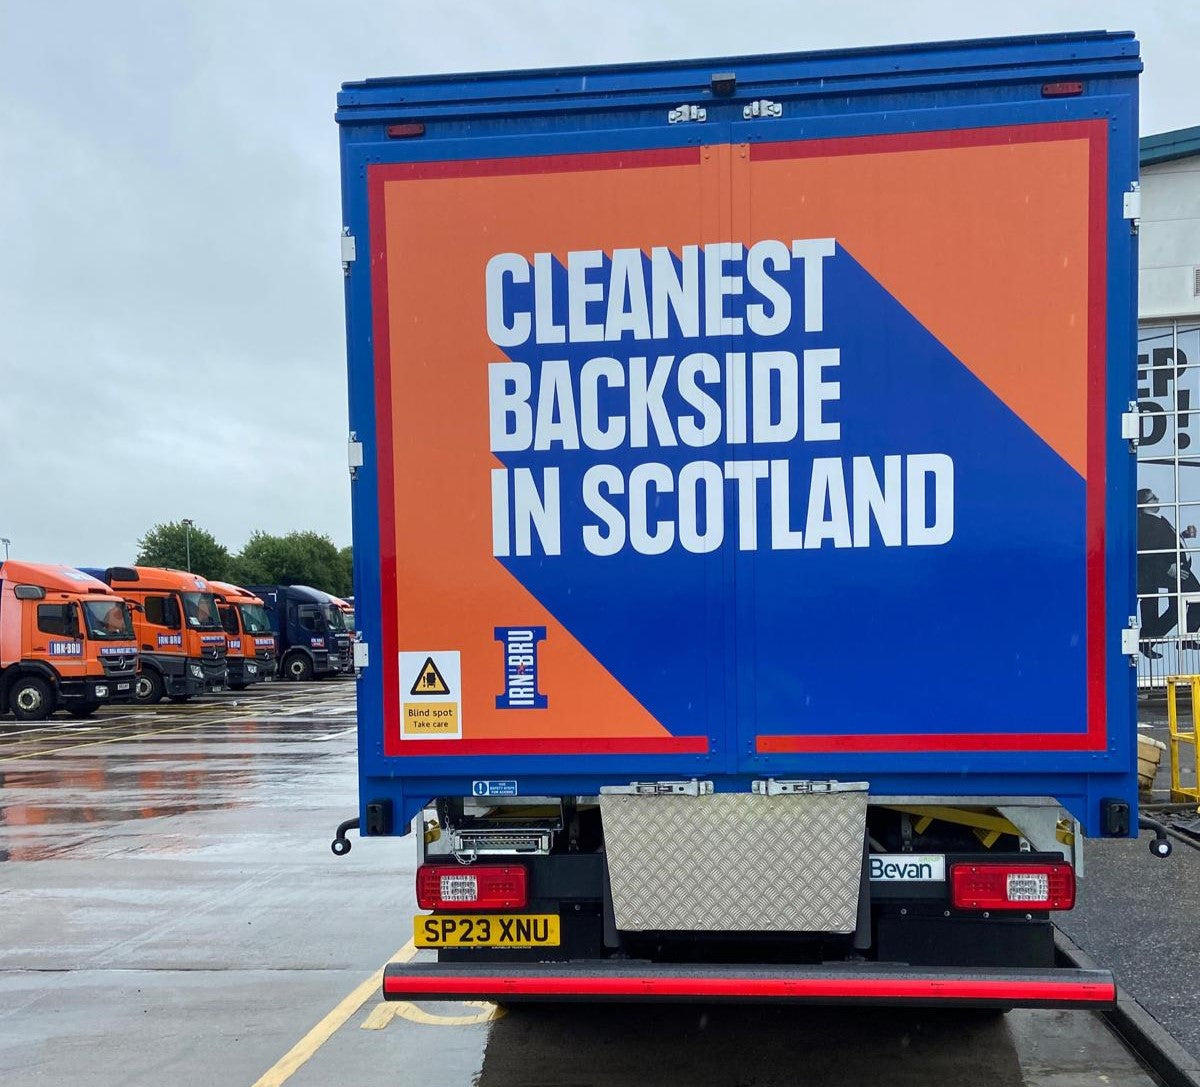 The back of an IRN-BRU truck with the text "Cleanest Backside in Scotland"